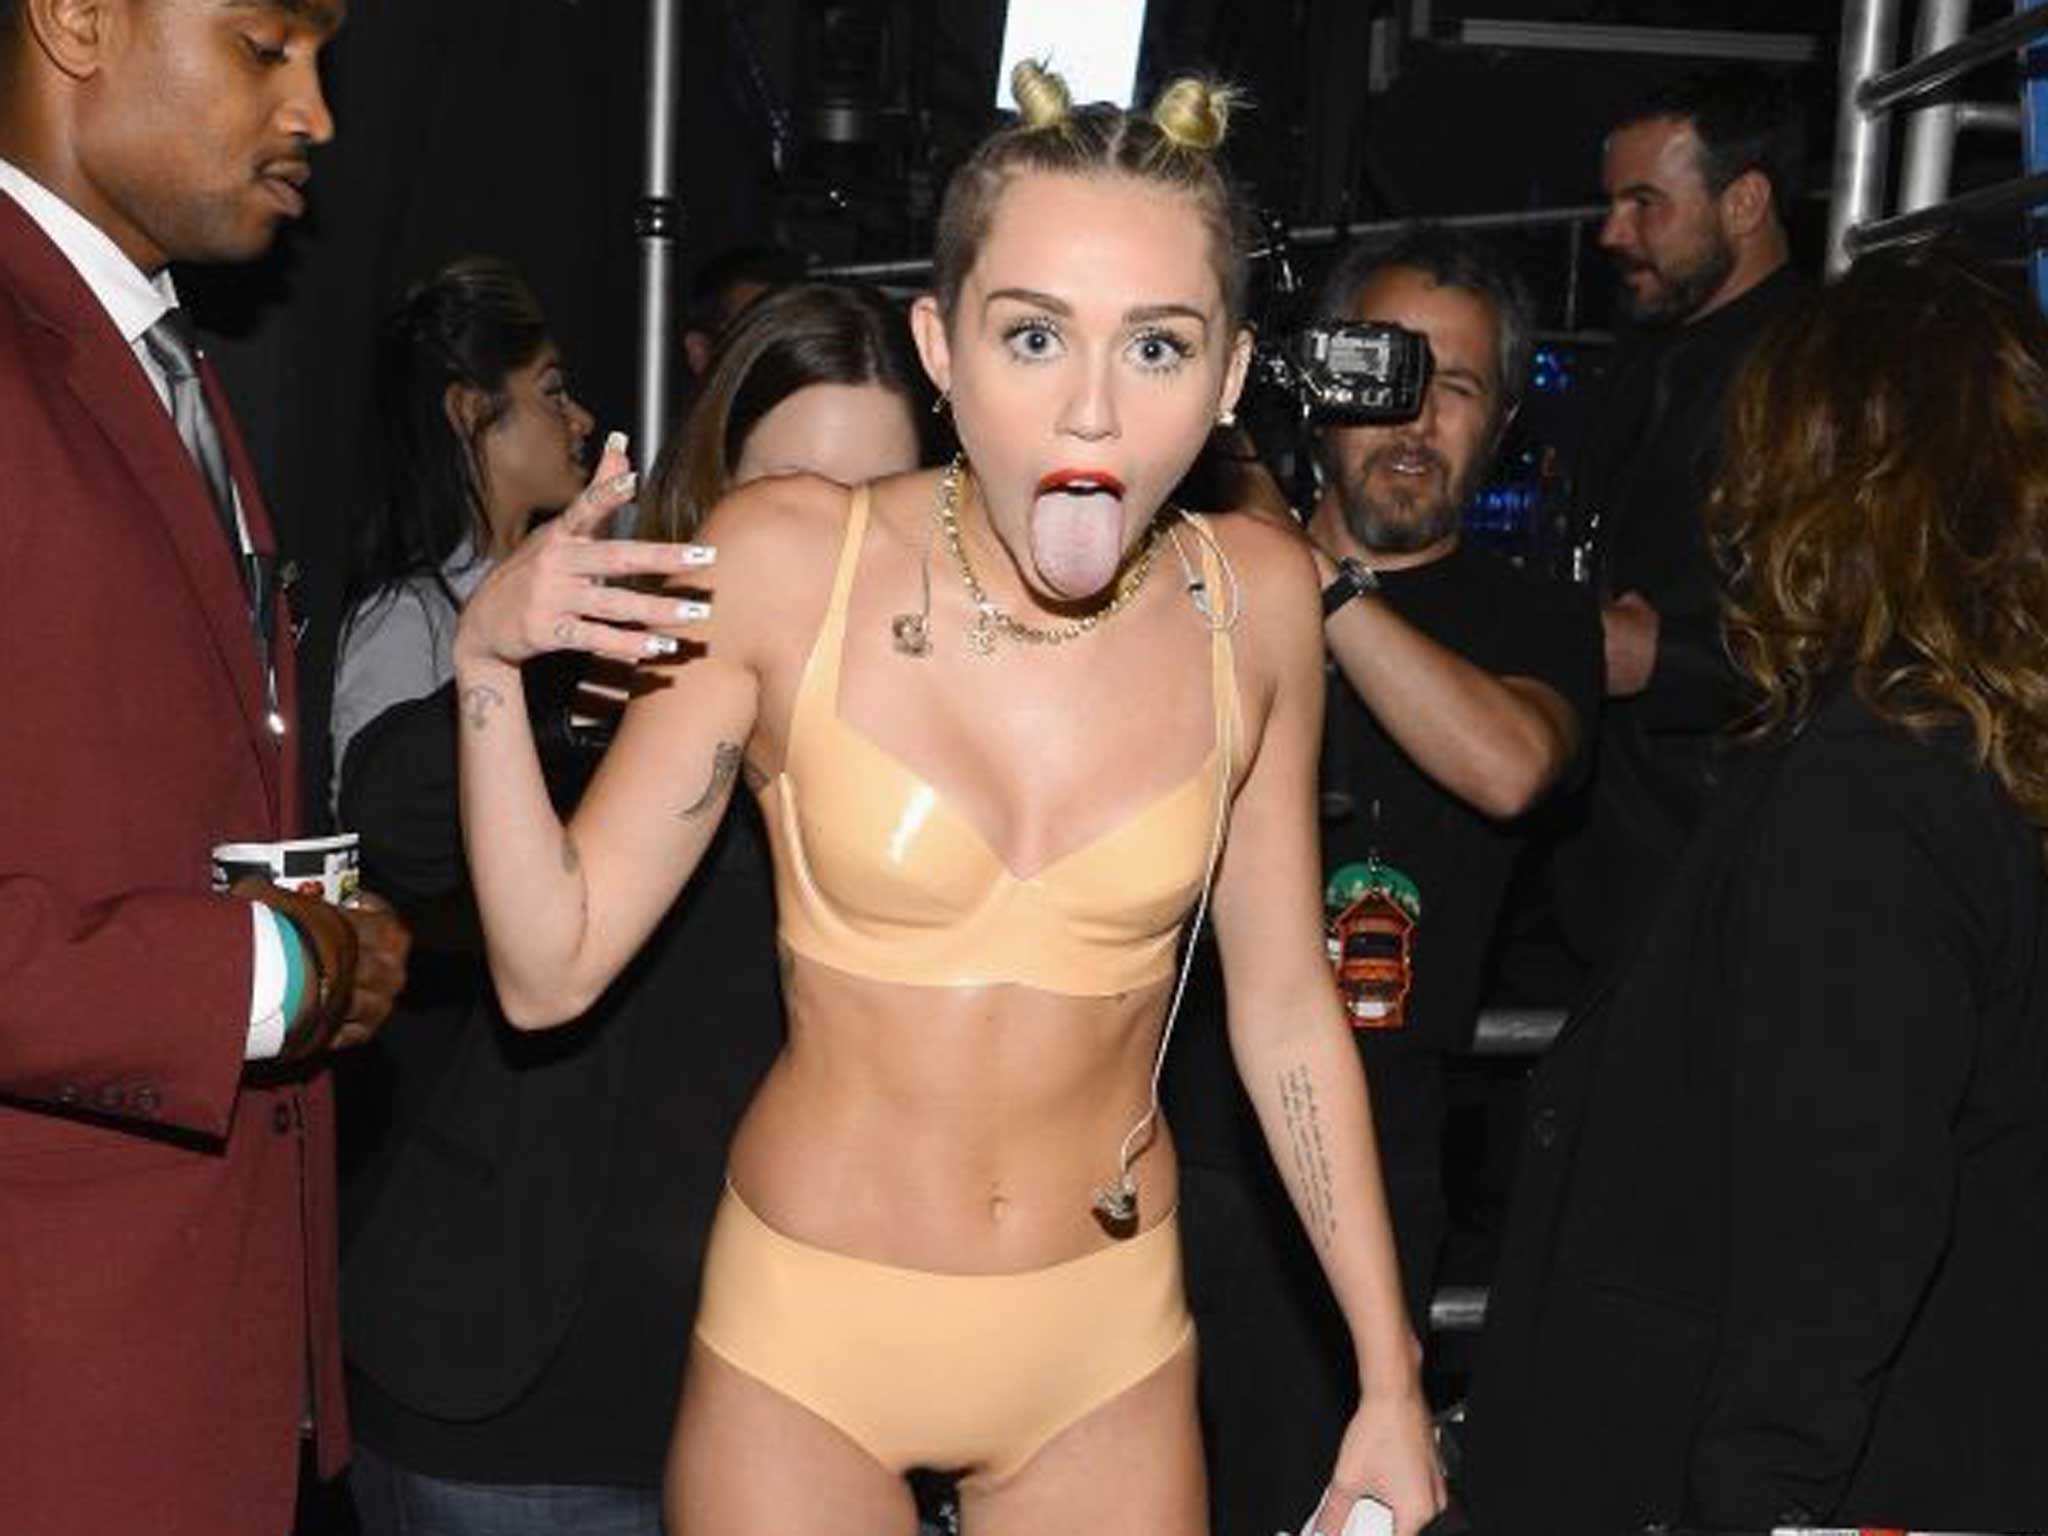 Miley Cyrus' mow infamous performance with Robin Thicke has sparked fresh debate